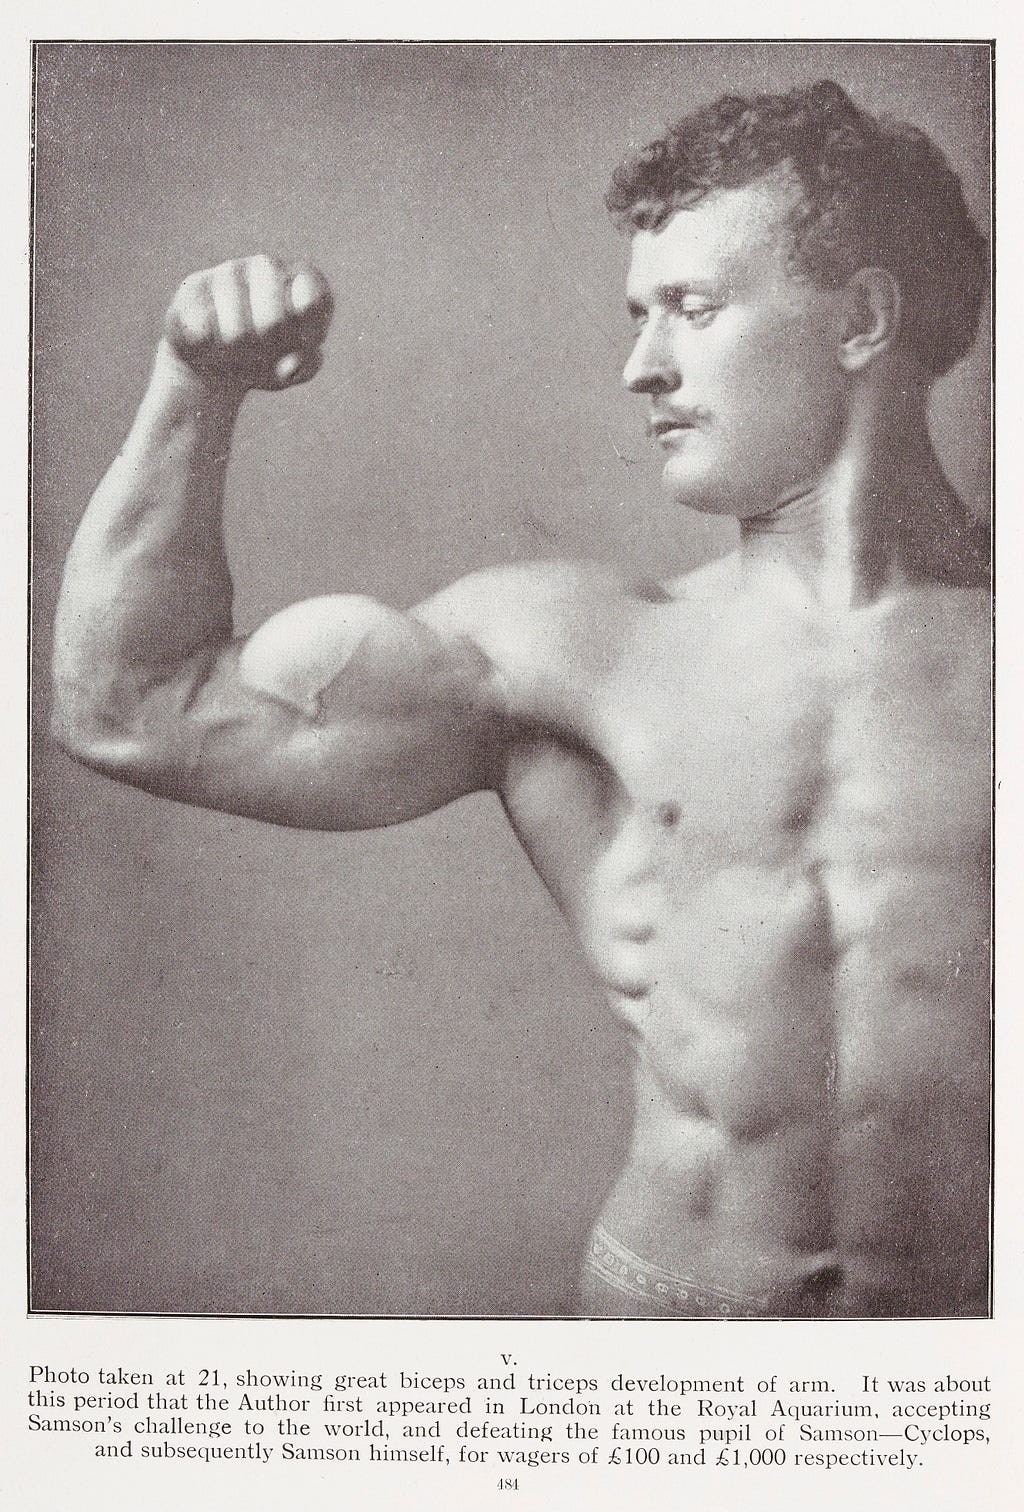 https://commons.wikimedia.org/wiki/File:Eugen_Sandow;_Life_of_the_Author_as_told_in_Photographs_Wellcome_L0033345.jpg